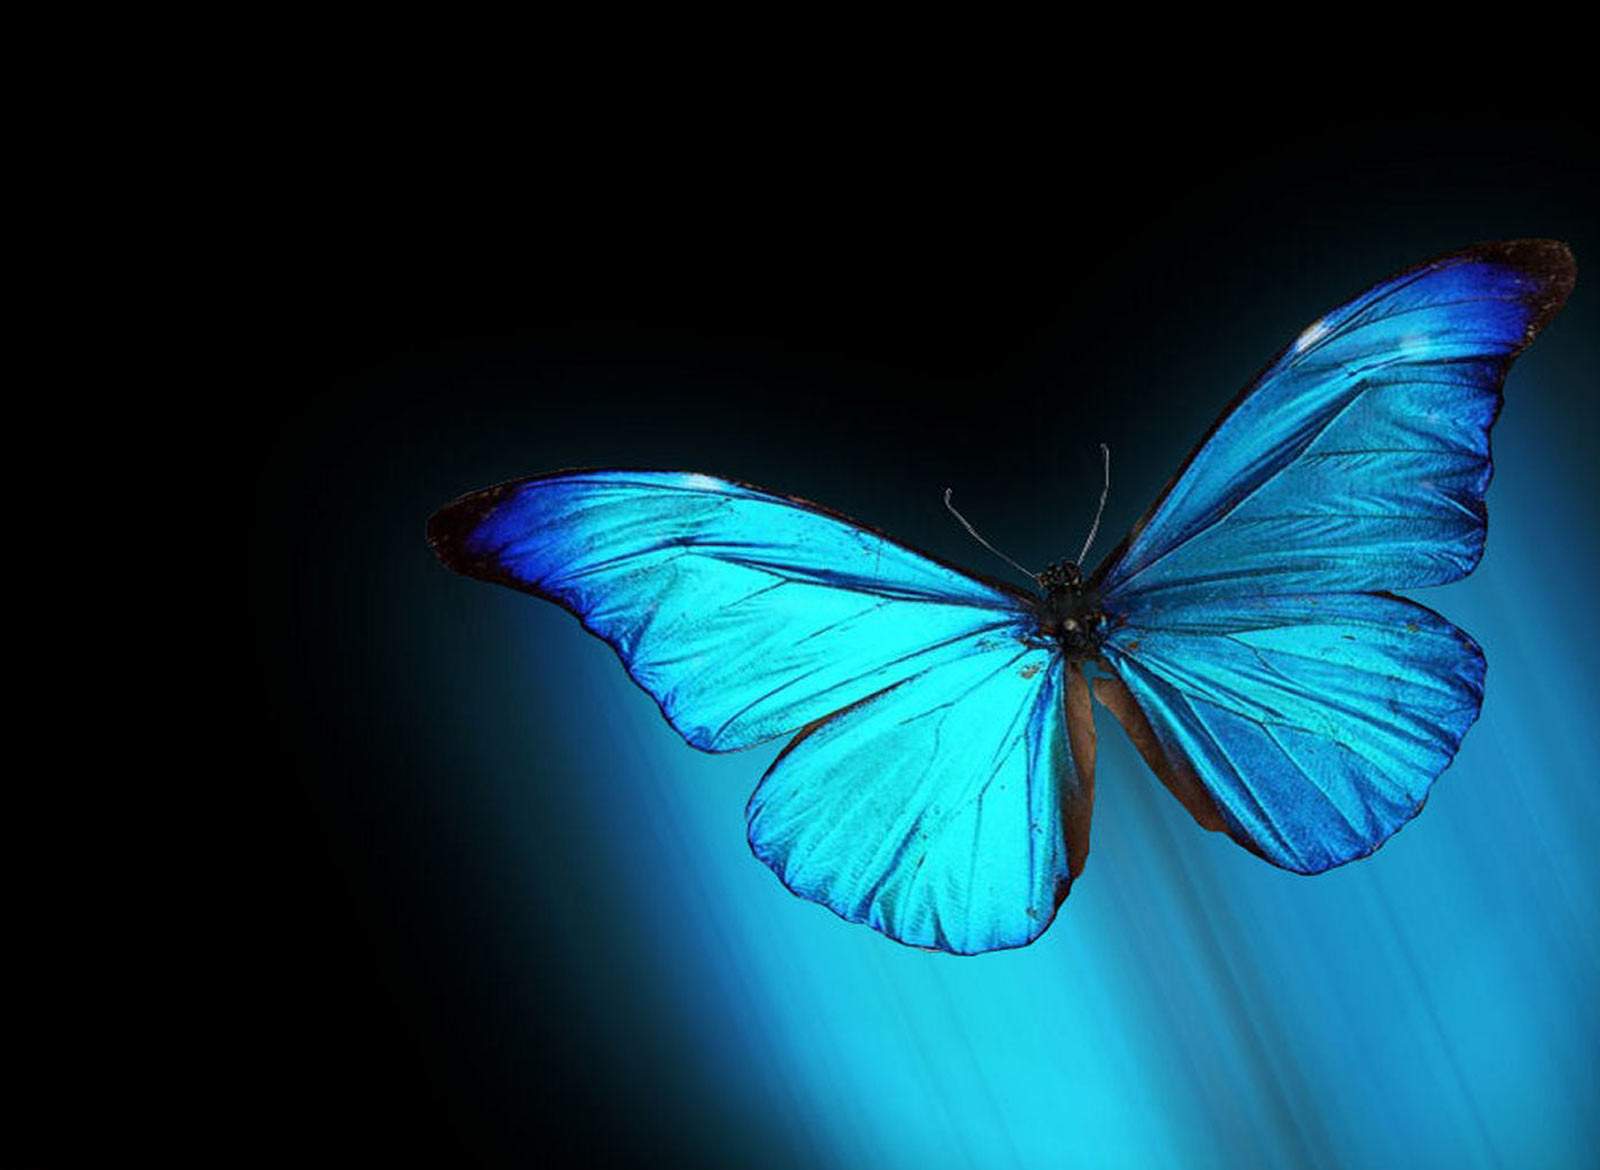 Live Wallpaper Butterfly - Wallpapers High Definition